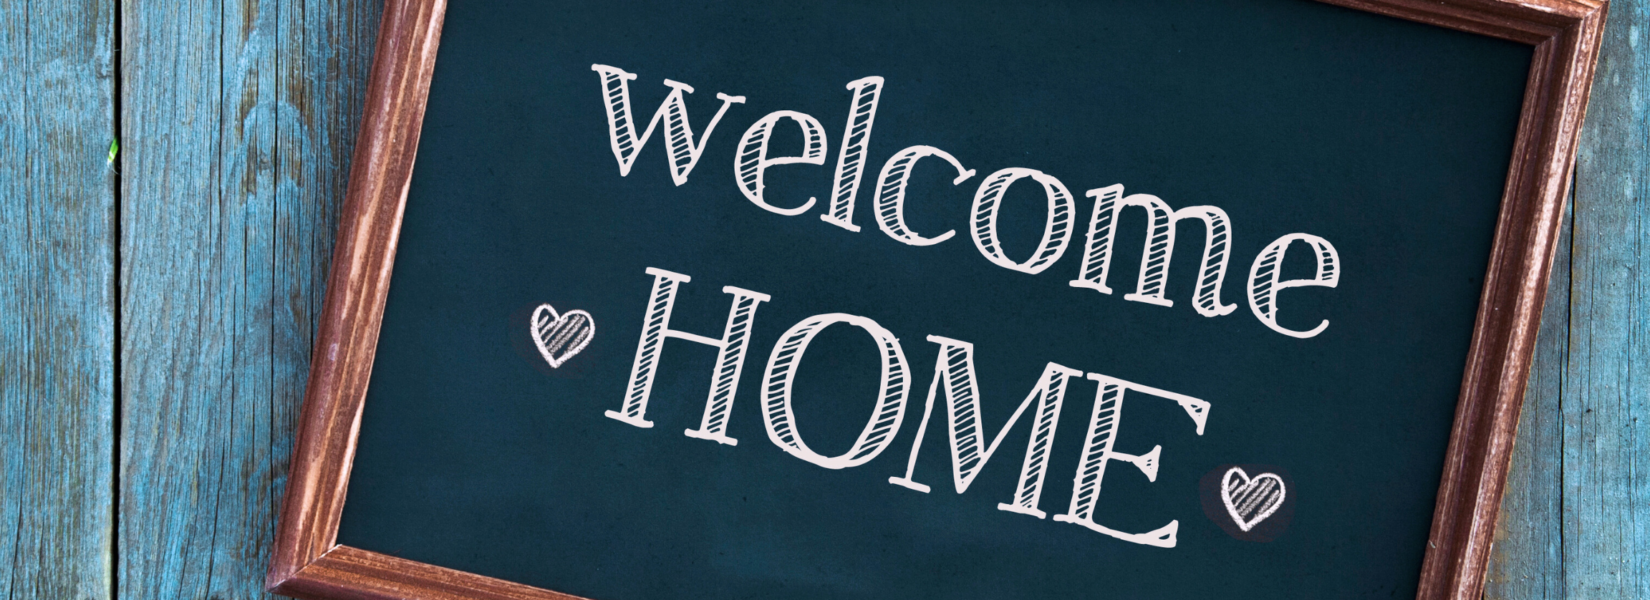 3 Super Easy Homemade Sign Ideas for Your Home